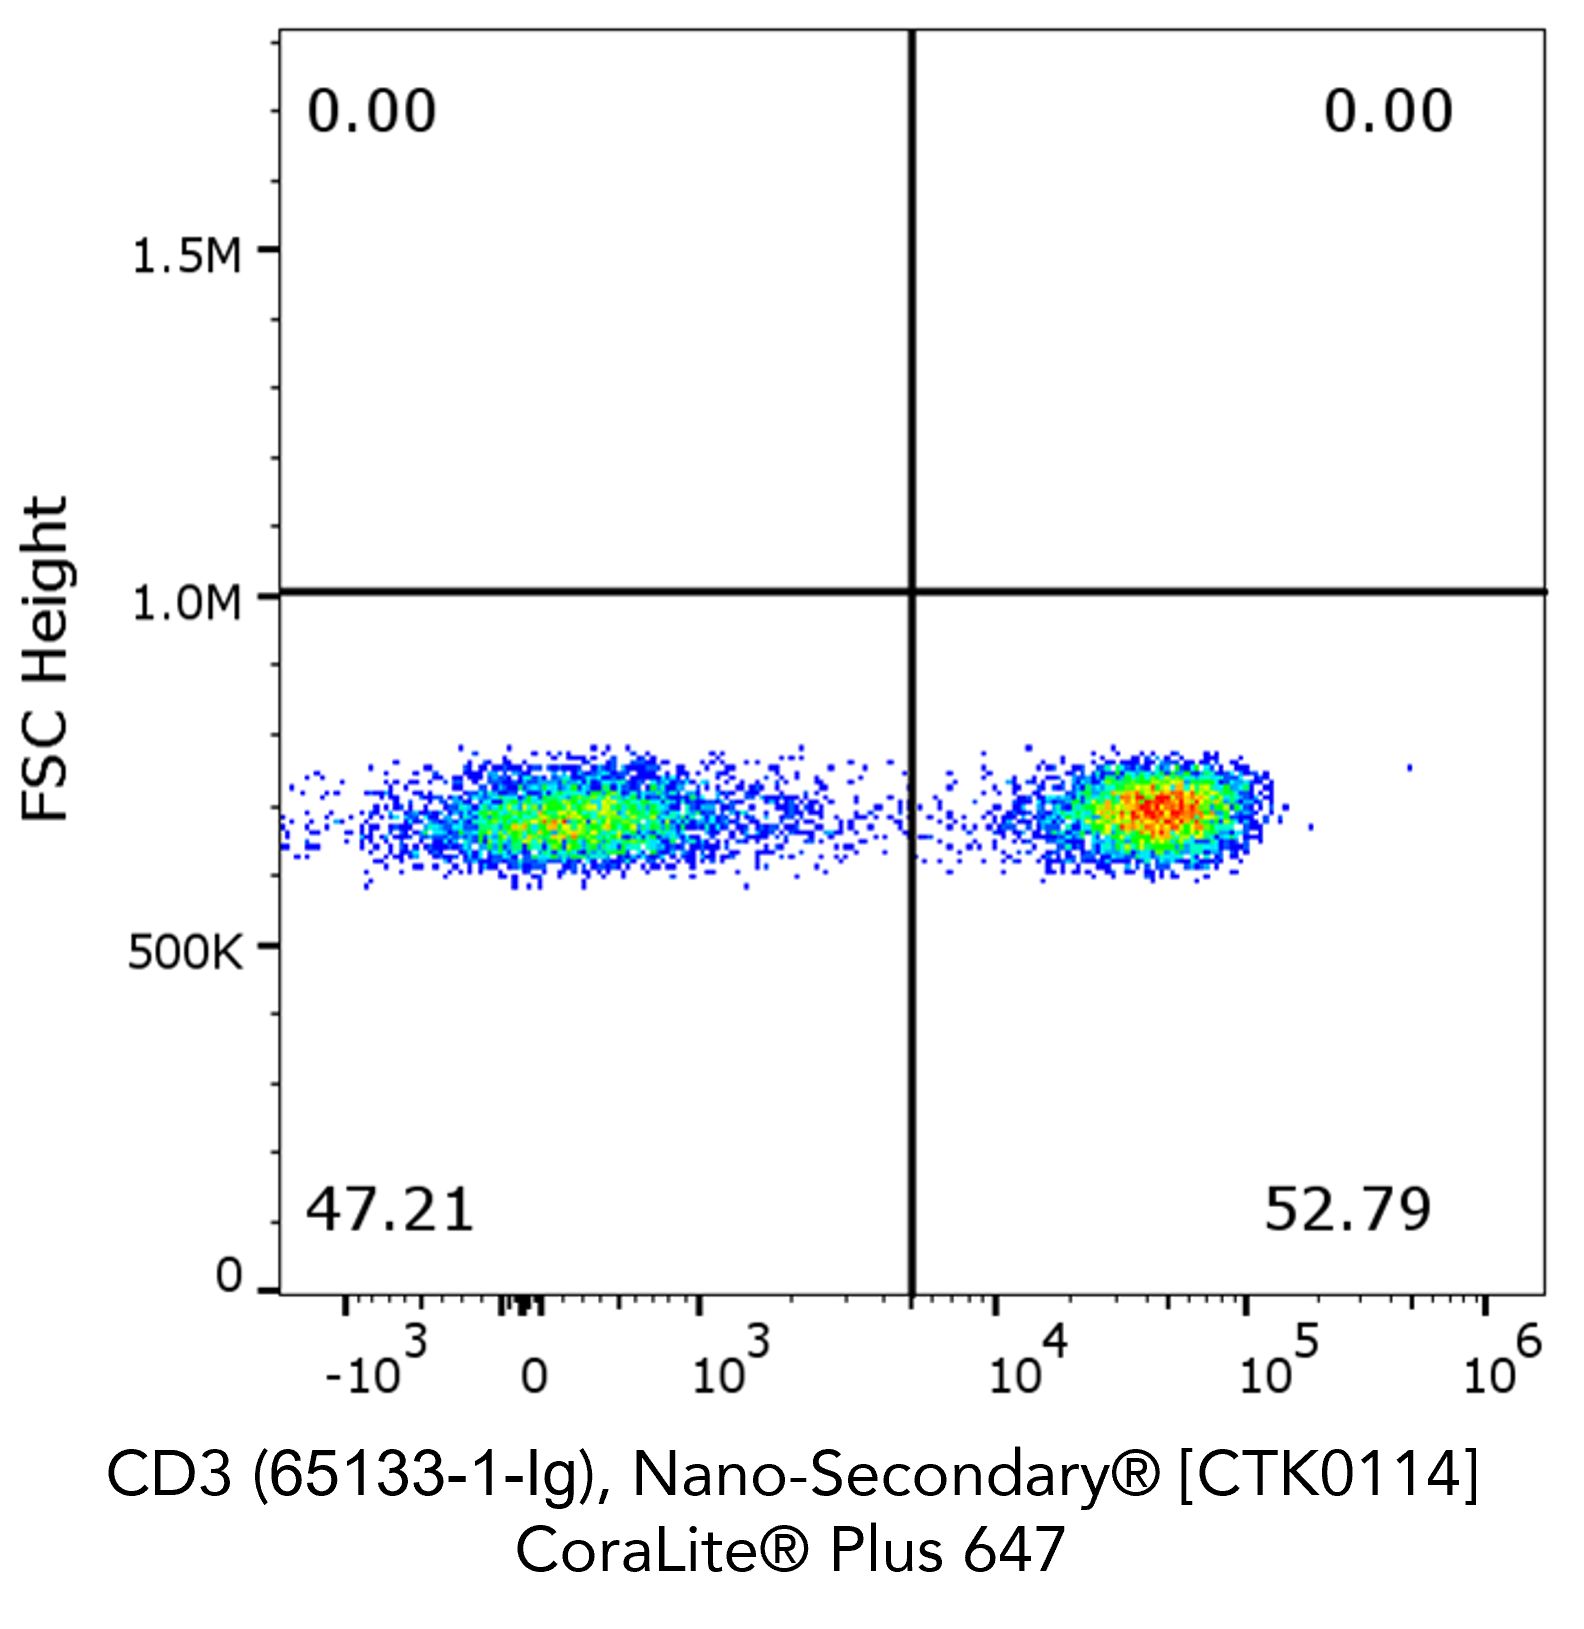 Flow cytometry analysis of 1X10^6 human peripheral blood mononuclear cells (PBMCs) stained with anti-human CD3 (clone OKT3, 65133-1-Ig) and Nano-Secondary® alpaca anti-mouse IgG2a, recombinant VHH, CoraLite® Plus 647.